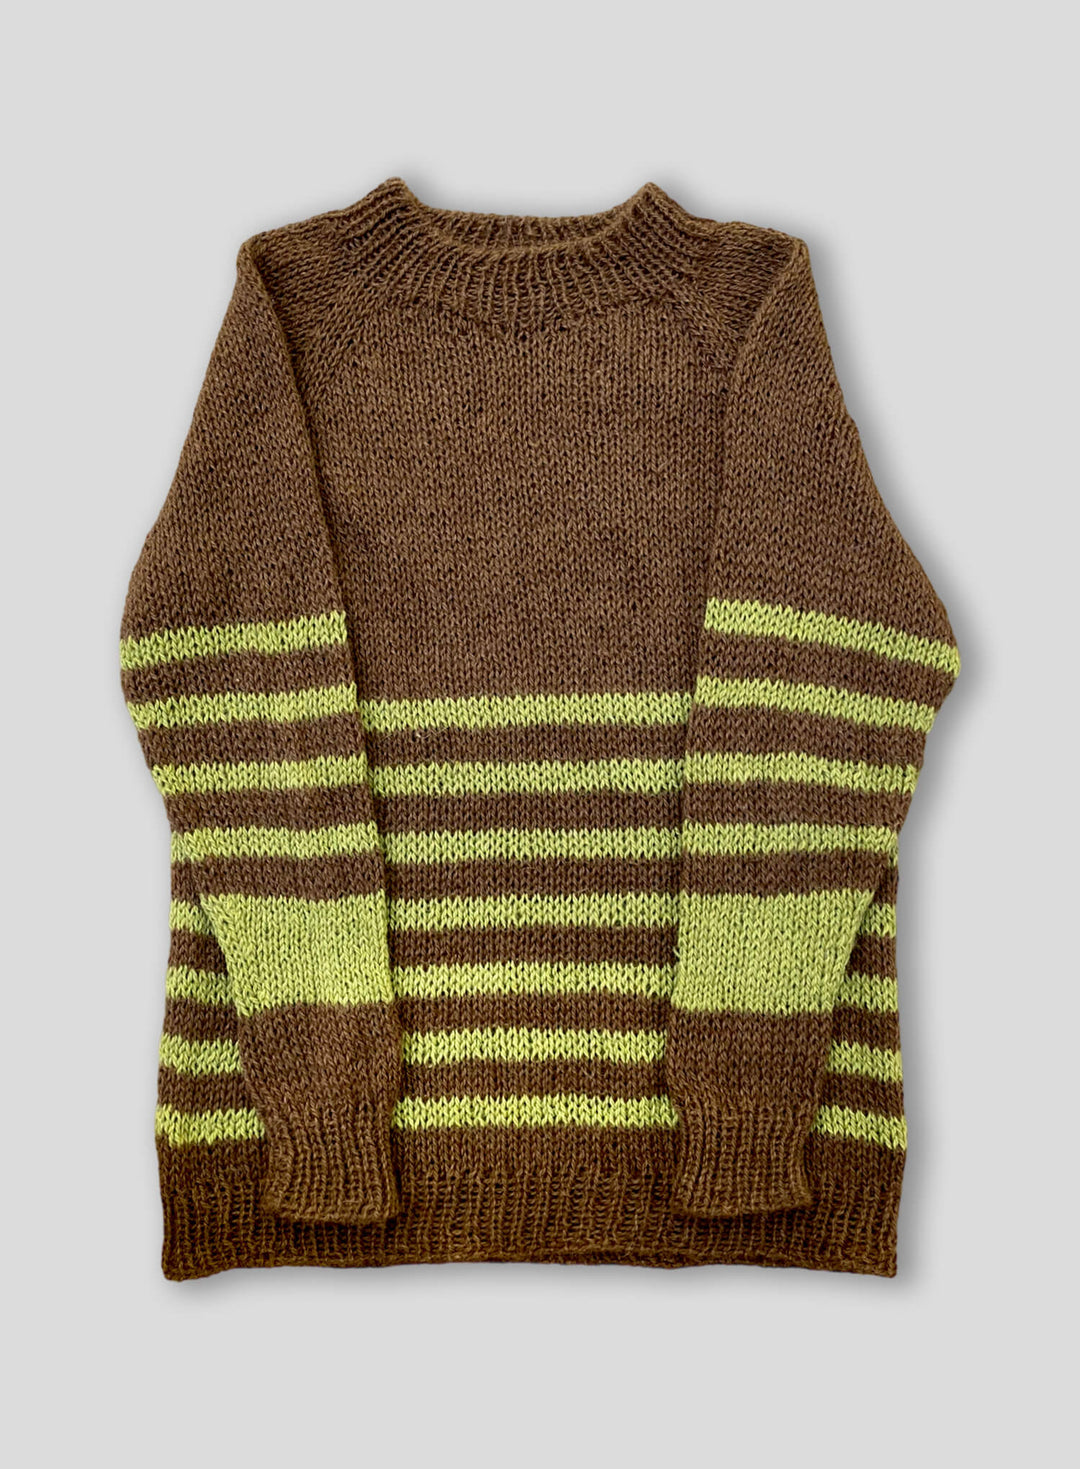 Brown and Green Hand-Knitted Llama Sweater